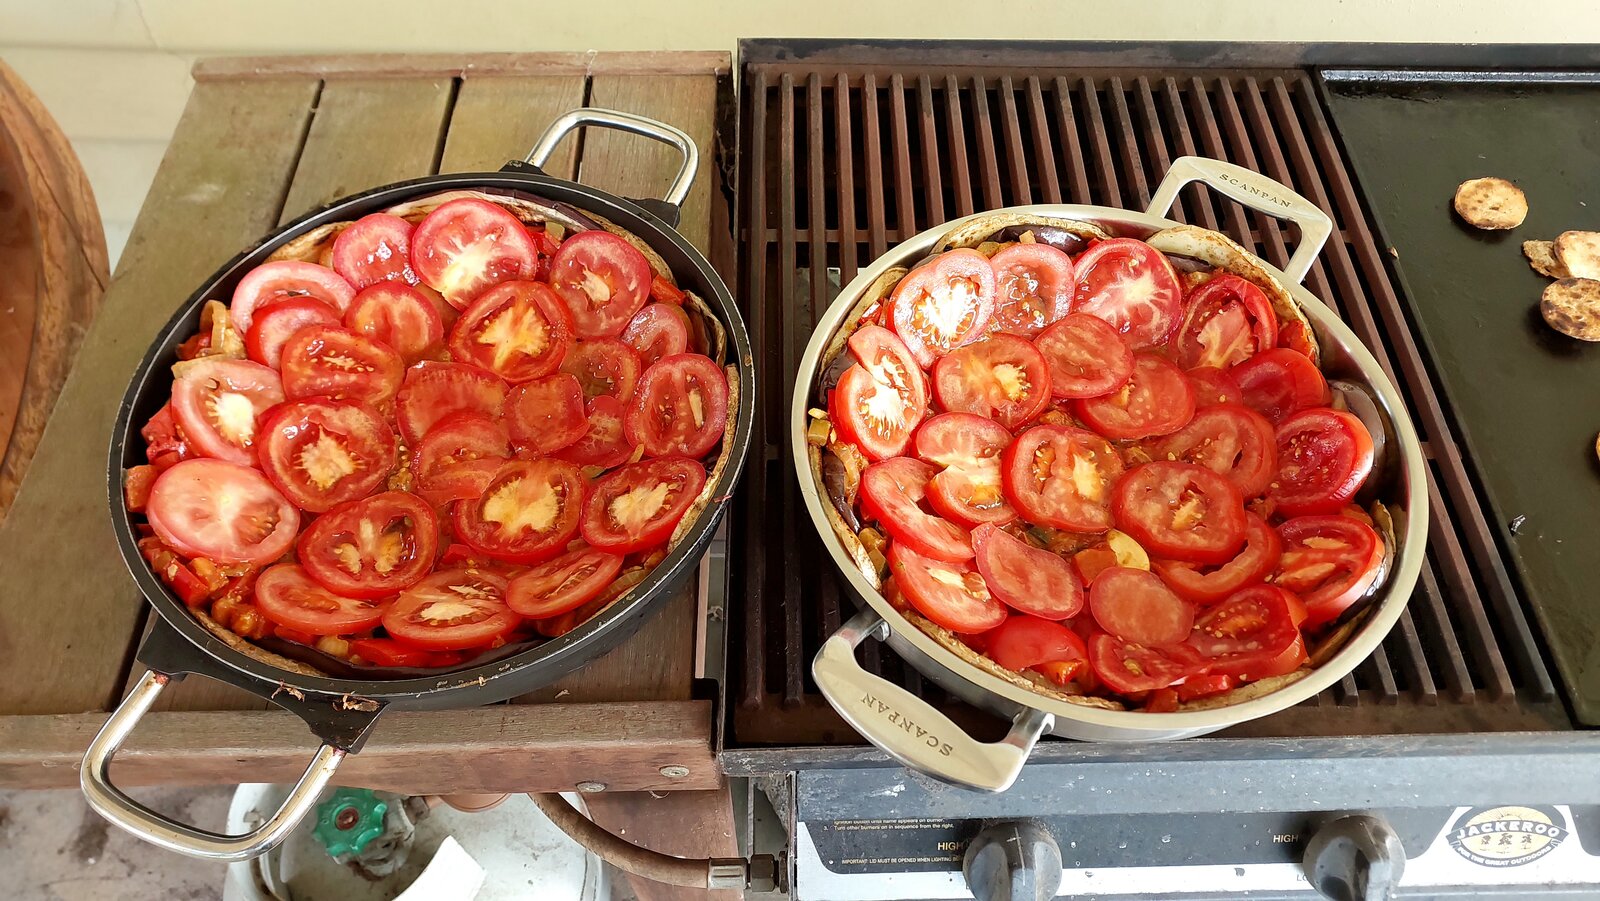 Sliced tomatoes added